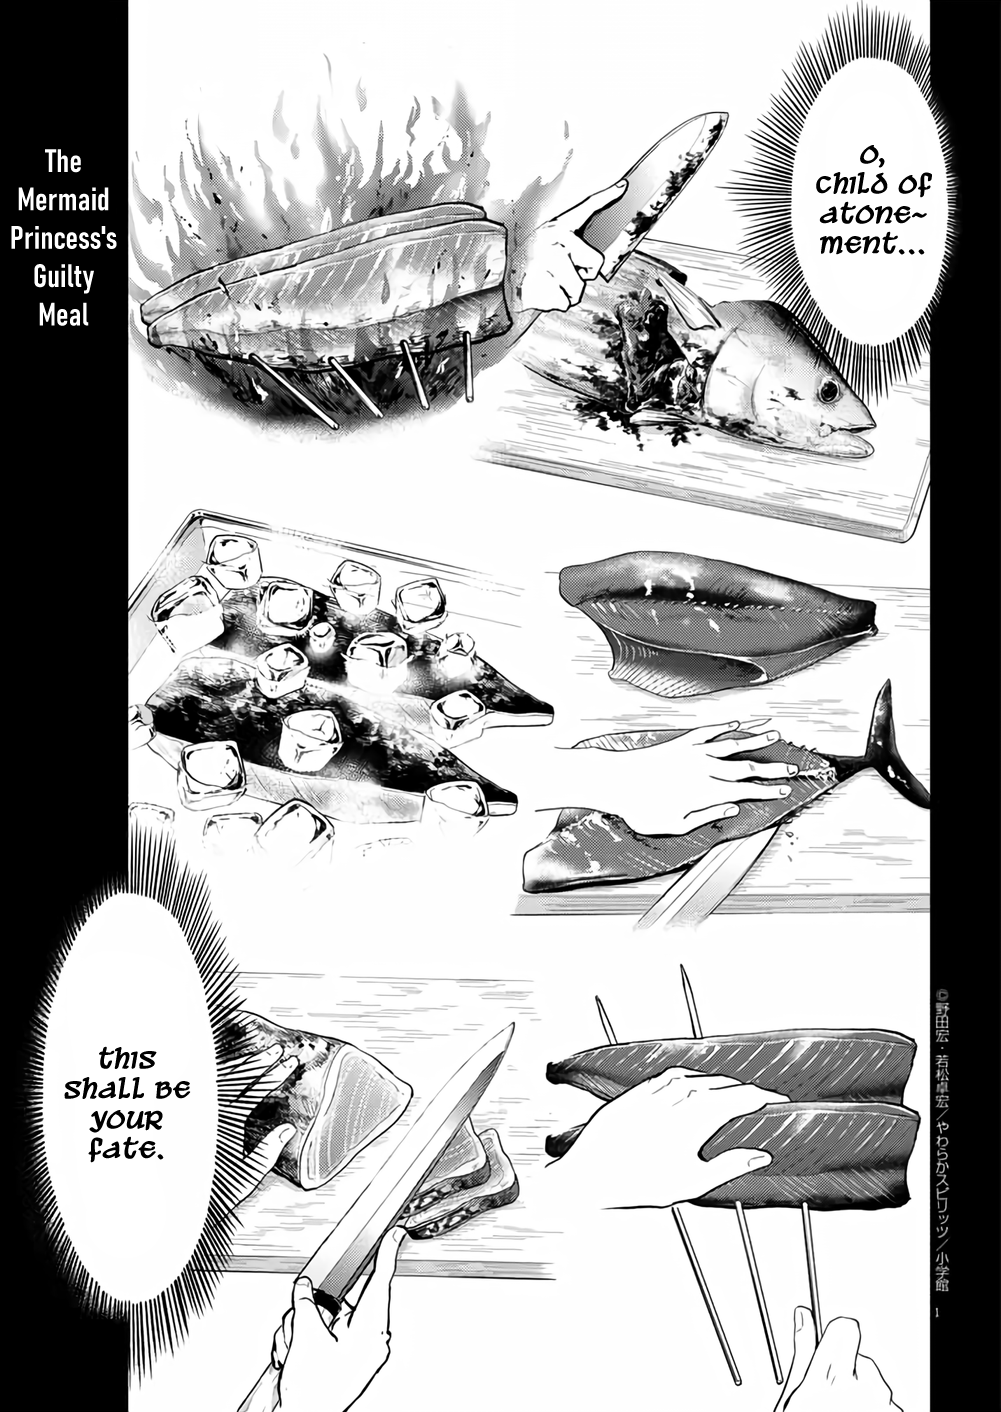 The Mermaid Princess's Guilty Meal - Page 1